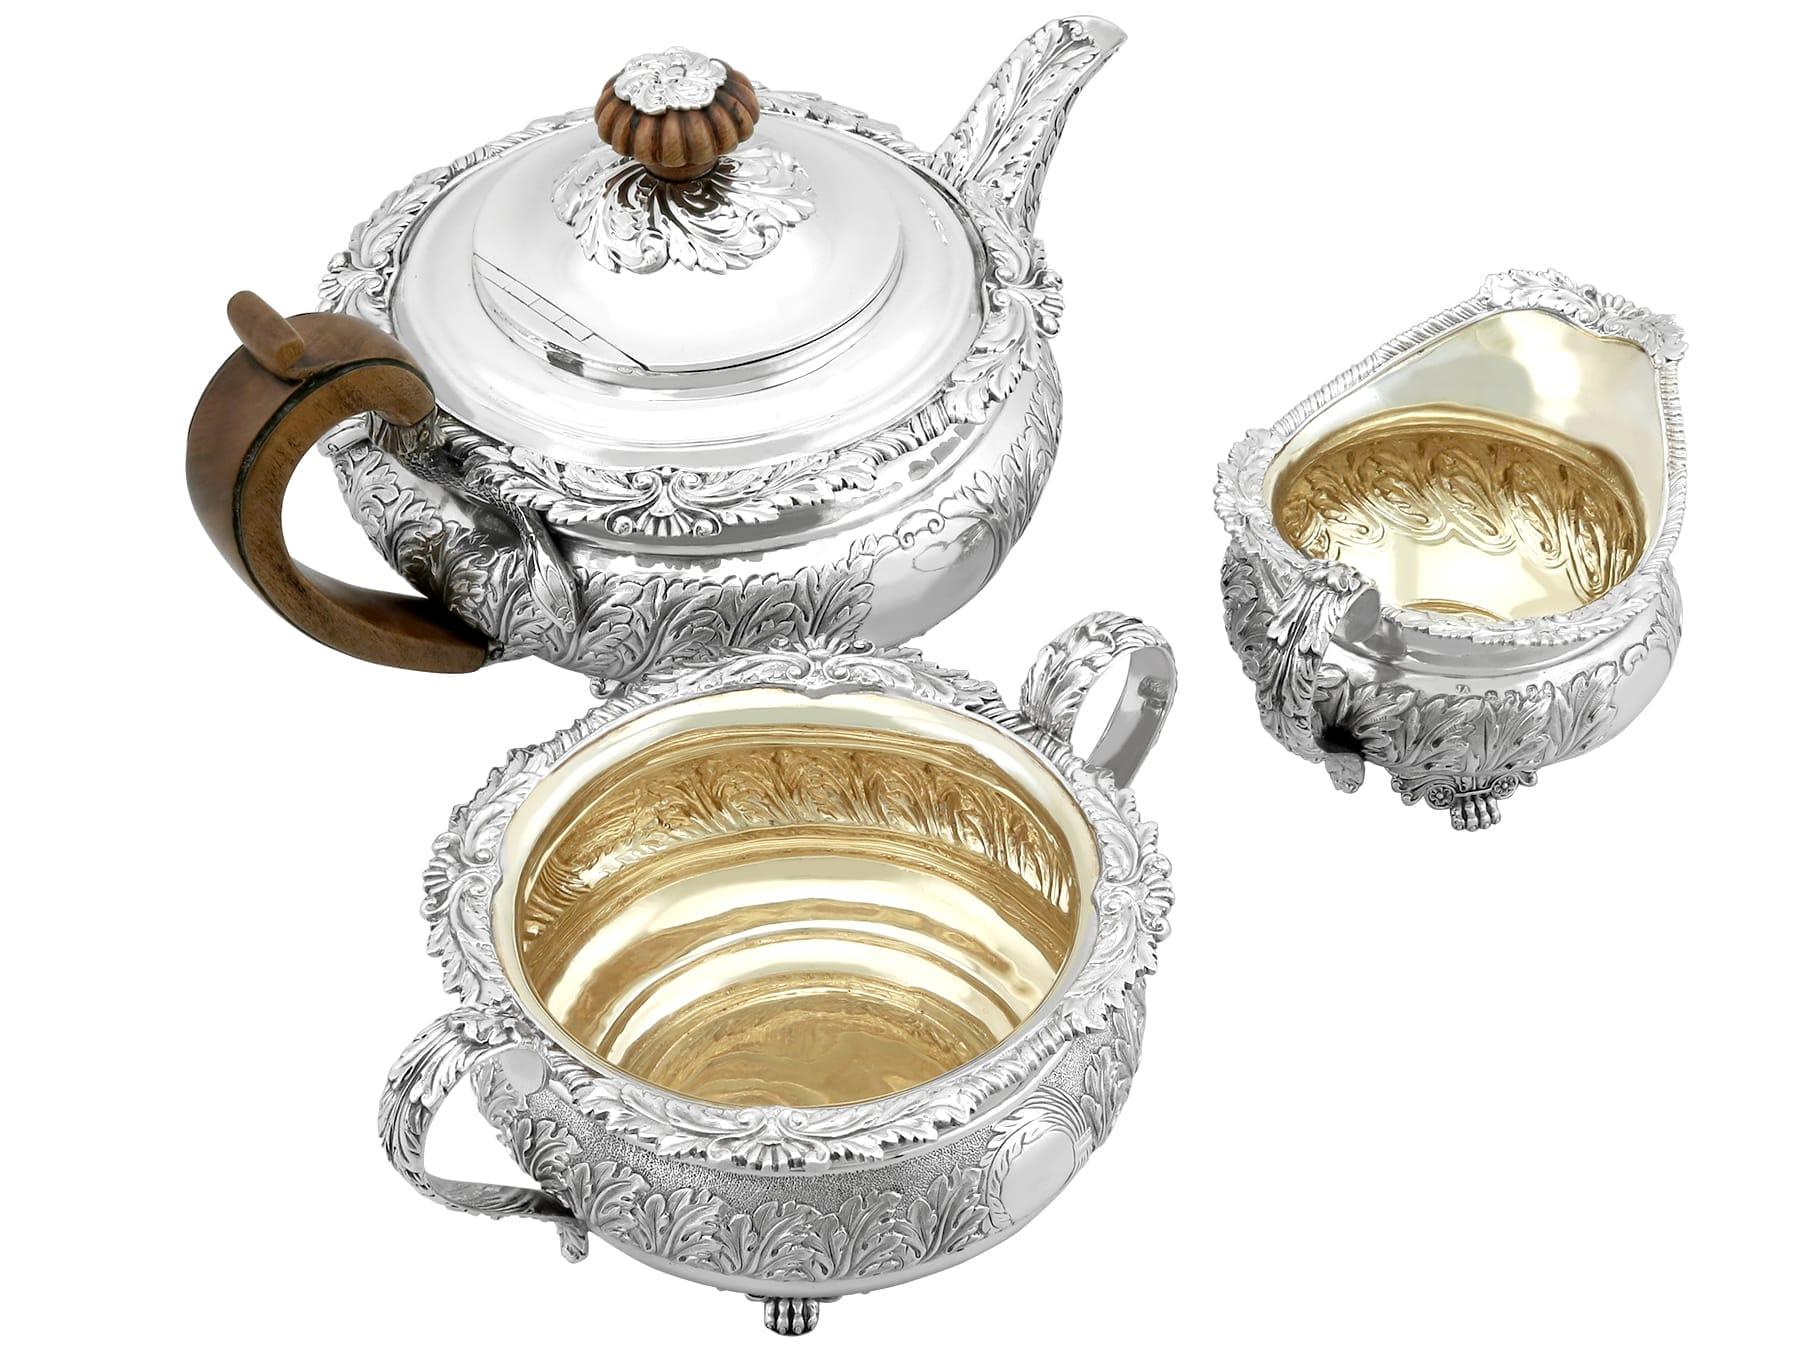 An exceptional, fine and impressive antique Georgian English sterling silver three piece tea service/set made by Joseph Angell I; an addition to our silver teaware collections.

This exceptional antique George III three piece sterling silver tea